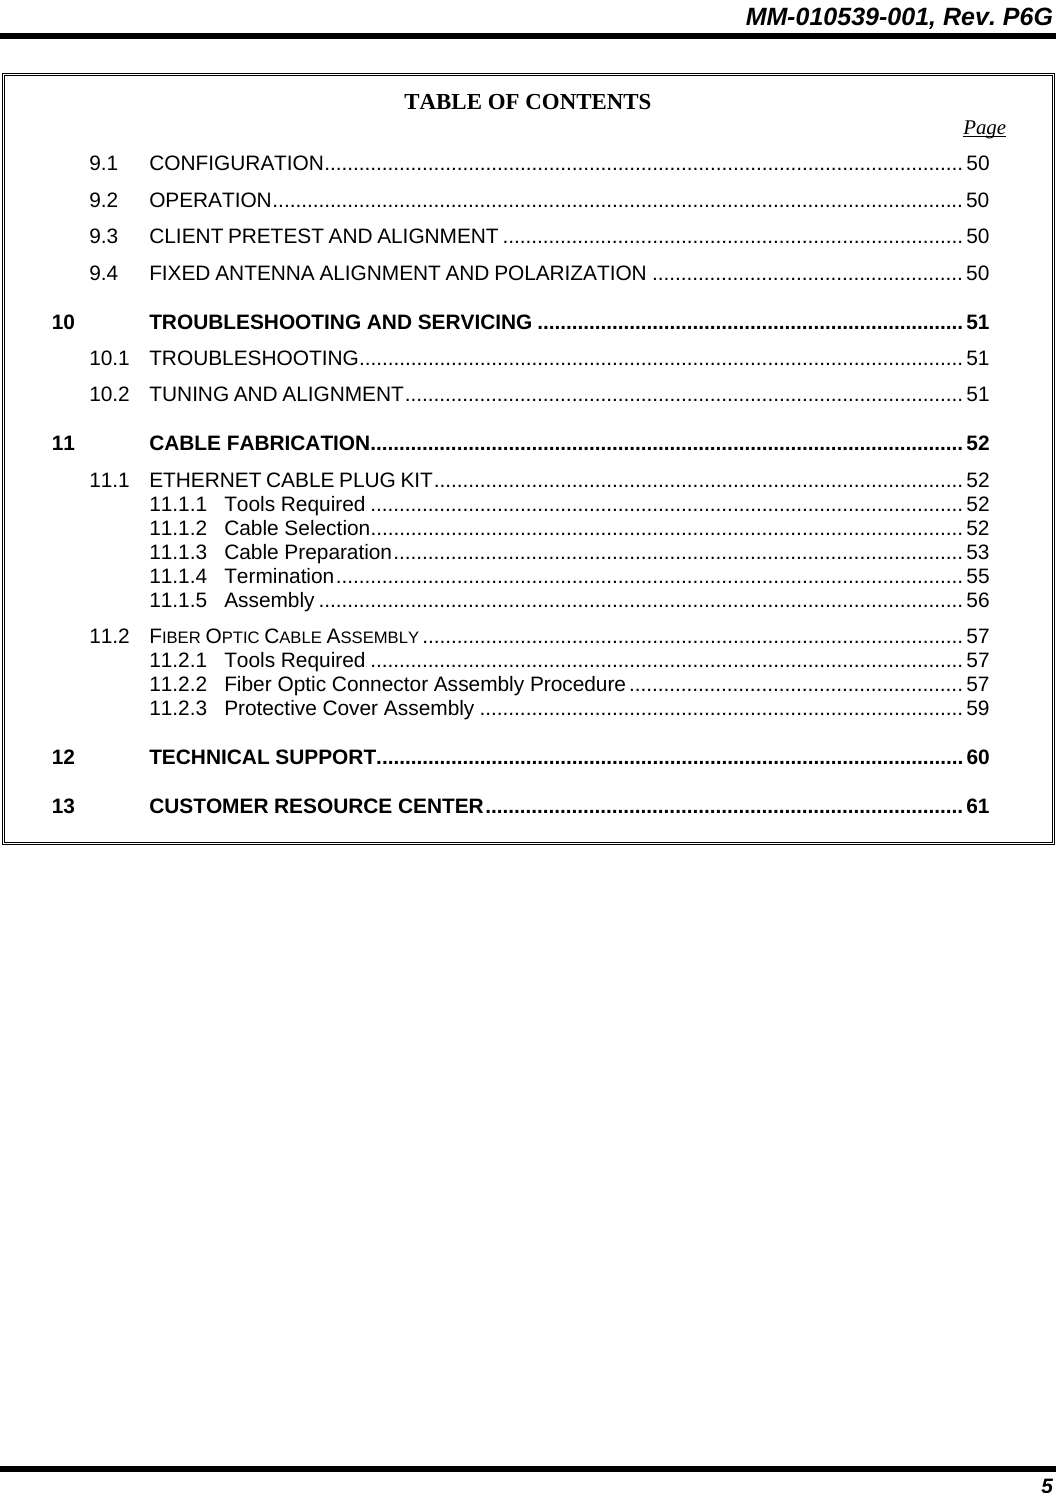 MM-010539-001, Rev. P6G  5 TABLE OF CONTENTS  Page 9.1 CONFIGURATION............................................................................................................... 50 9.2 OPERATION........................................................................................................................ 50 9.3 CLIENT PRETEST AND ALIGNMENT ................................................................................ 50 9.4 FIXED ANTENNA ALIGNMENT AND POLARIZATION ...................................................... 50 10 TROUBLESHOOTING AND SERVICING ..........................................................................51 10.1 TROUBLESHOOTING......................................................................................................... 51 10.2 TUNING AND ALIGNMENT................................................................................................. 51 11 CABLE FABRICATION.......................................................................................................52 11.1 ETHERNET CABLE PLUG KIT............................................................................................ 52 11.1.1 Tools Required ....................................................................................................... 52 11.1.2 Cable Selection....................................................................................................... 52 11.1.3 Cable Preparation................................................................................................... 53 11.1.4 Termination............................................................................................................. 55 11.1.5 Assembly ................................................................................................................ 56 11.2 FIBER OPTIC CABLE ASSEMBLY .............................................................................................. 57 11.2.1 Tools Required ....................................................................................................... 57 11.2.2 Fiber Optic Connector Assembly Procedure .......................................................... 57 11.2.3 Protective Cover Assembly .................................................................................... 59 12 TECHNICAL SUPPORT......................................................................................................60 13 CUSTOMER RESOURCE CENTER................................................................................... 61   